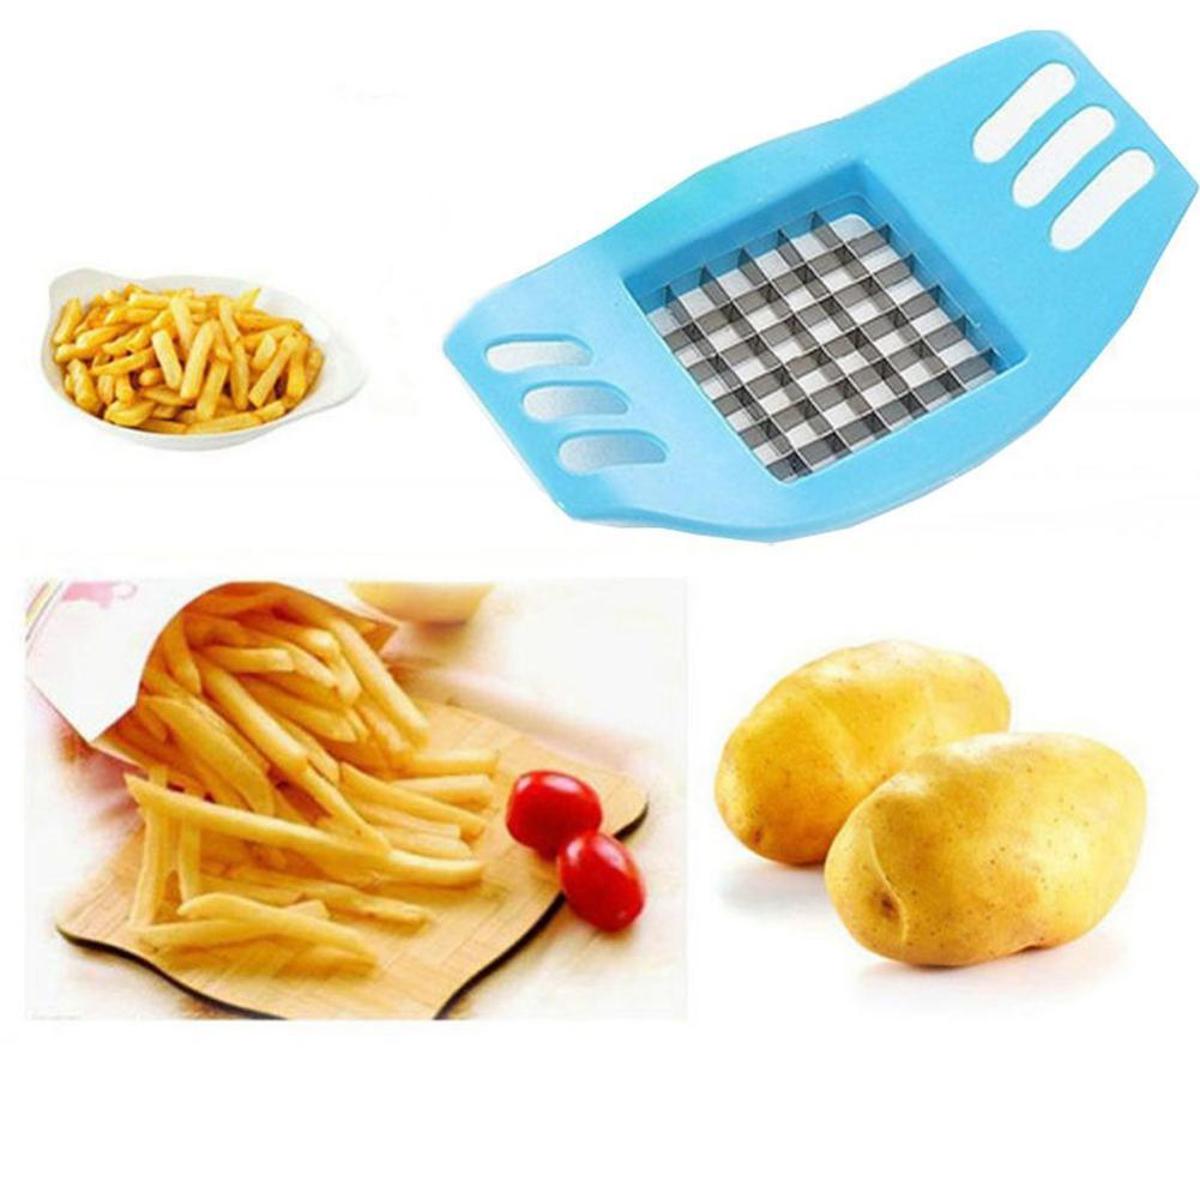 1pcs Potato Cutter Stainless Steel French Fry Fries slicer Cutter